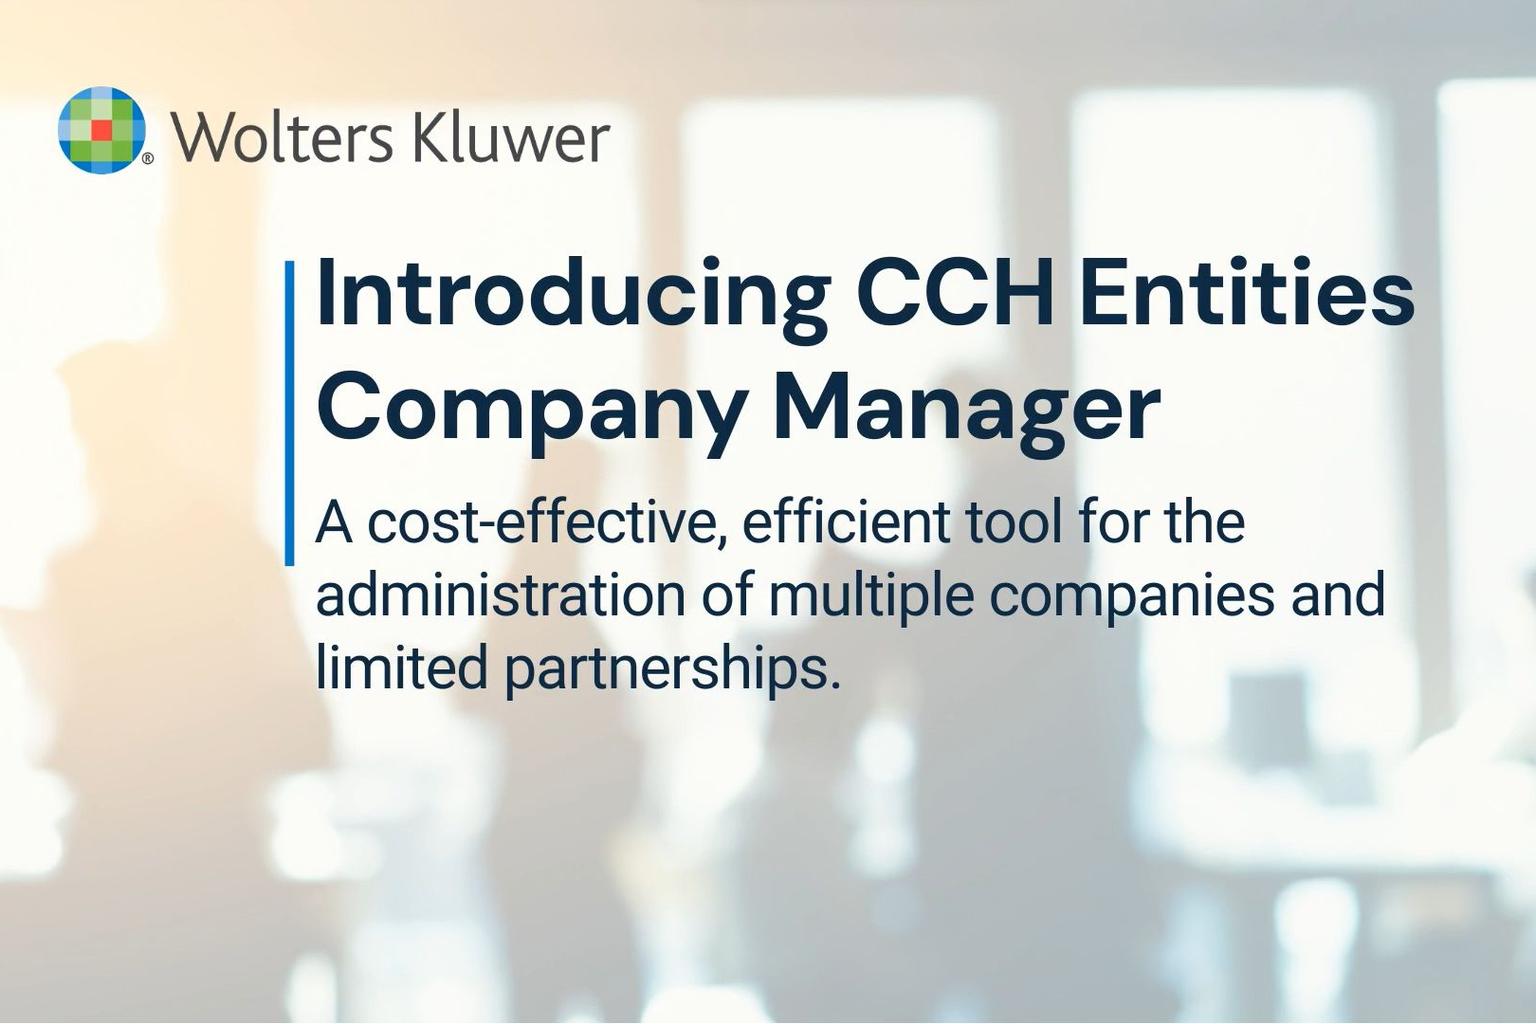 Introducing CCH Entities Company Manager